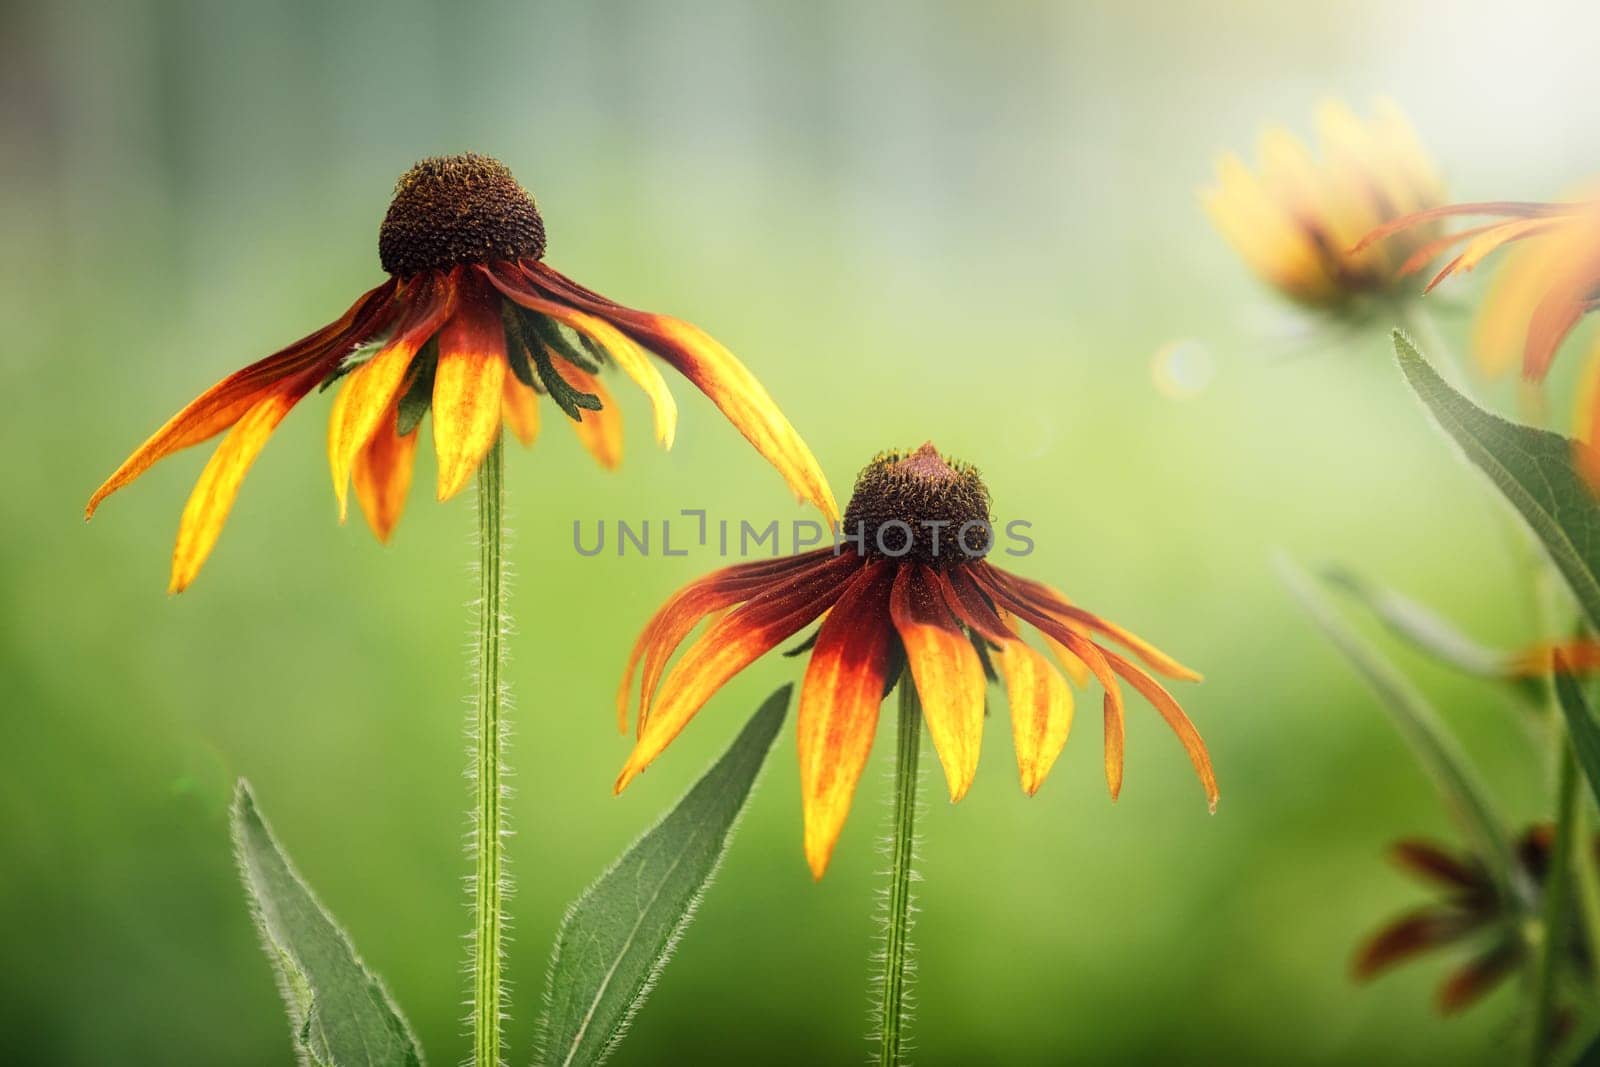 Flowers orange rudbeckia. Blooming beautiful flowers of orange rudbeckia (Black-eyed Susan) flower bed in the summer garden. Soft blurred selective focus. by Lincikas